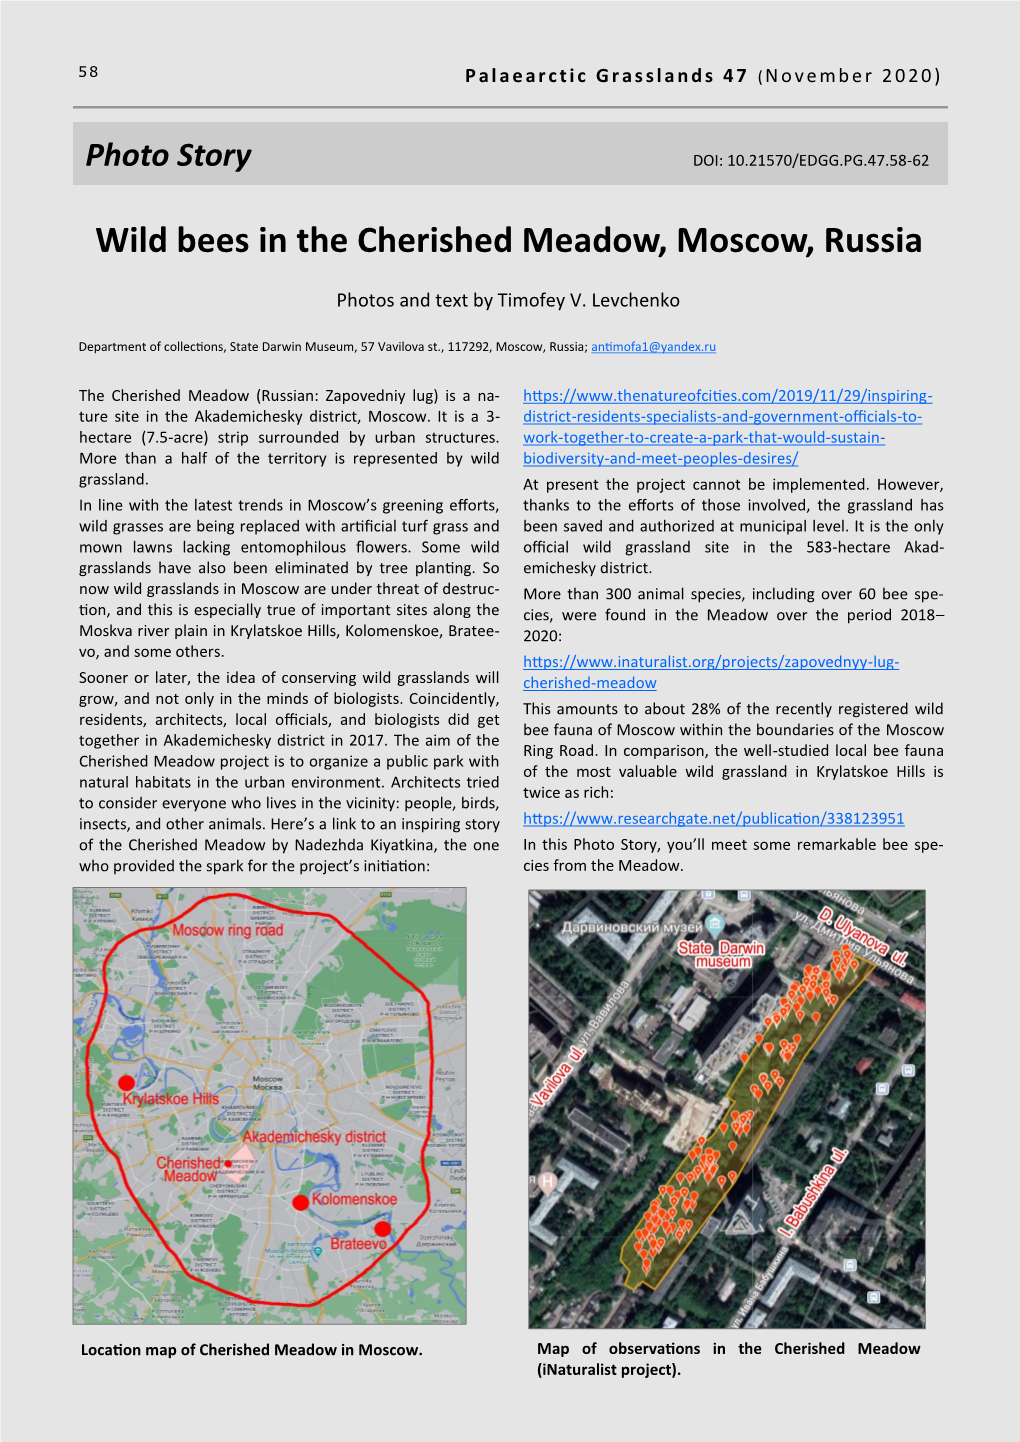 Wild Bees in the Cherished Meadow, Moscow, Russia